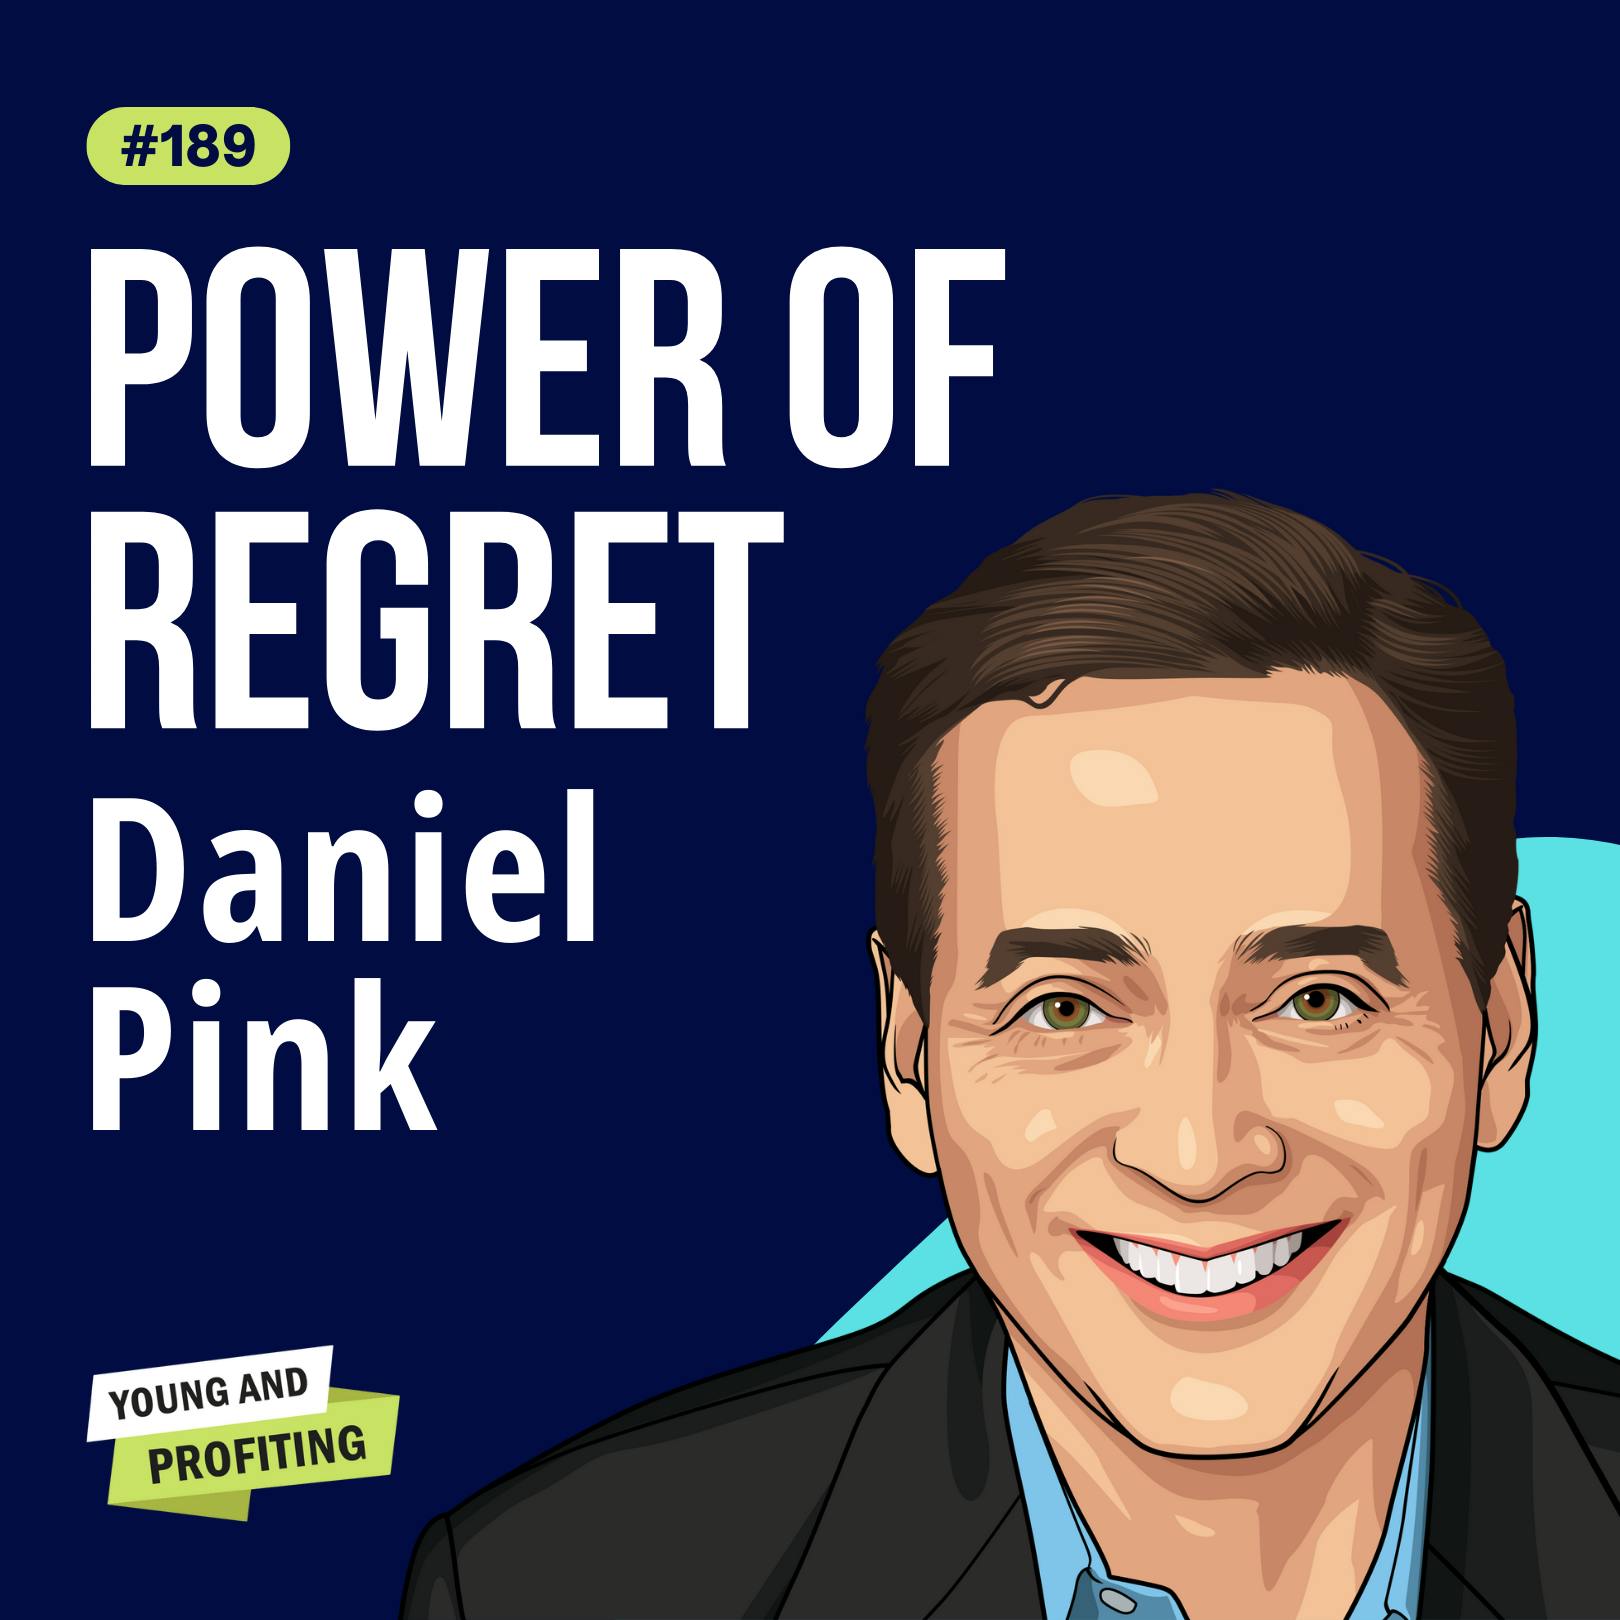 Daniel Pink: Turn Regrets Into Gold, Understand Your Emotions, and Live Your Best Life | E189 by Hala Taha | YAP Media Network